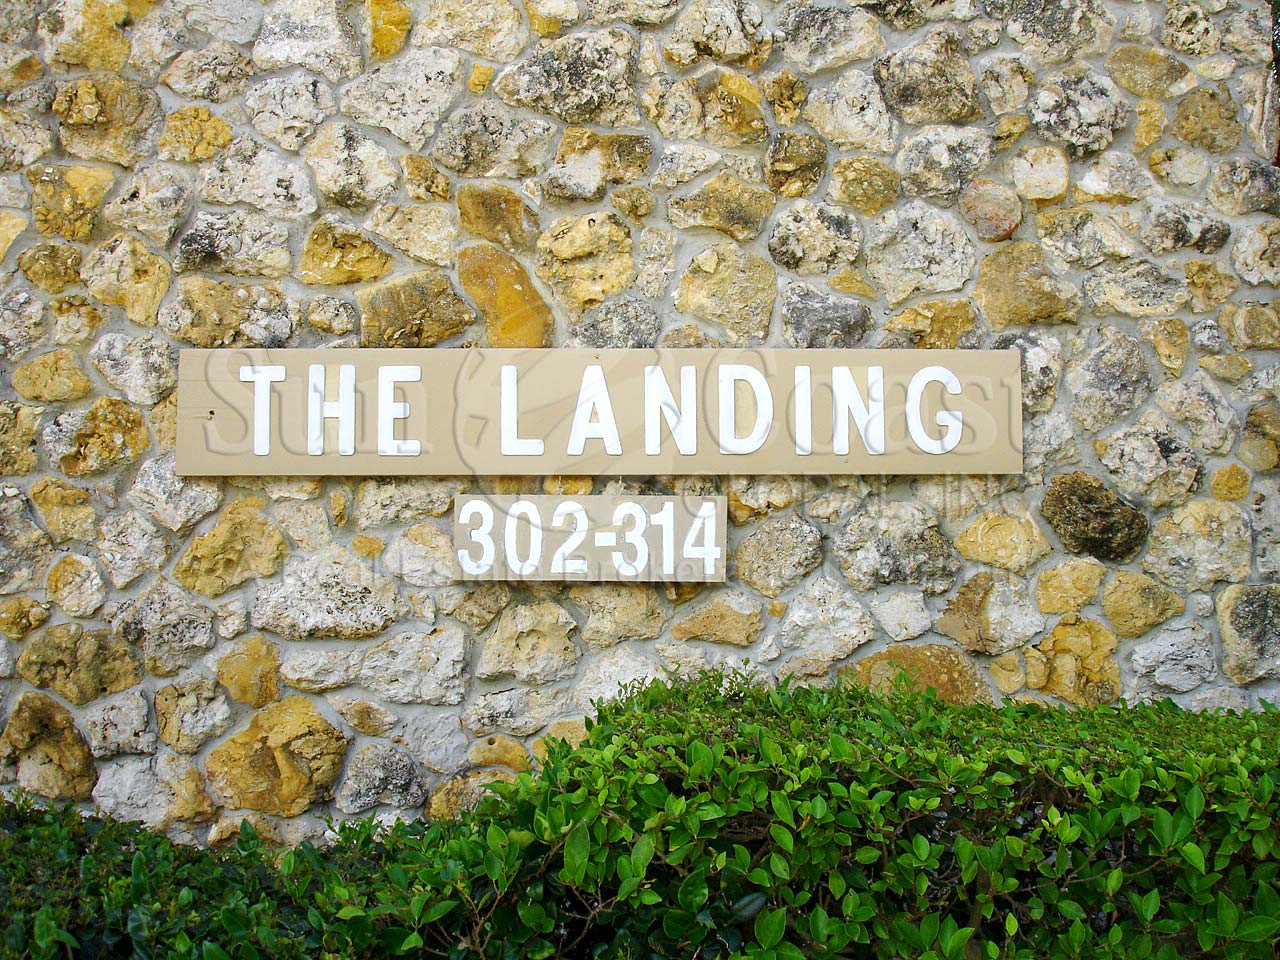 The Landings Signage